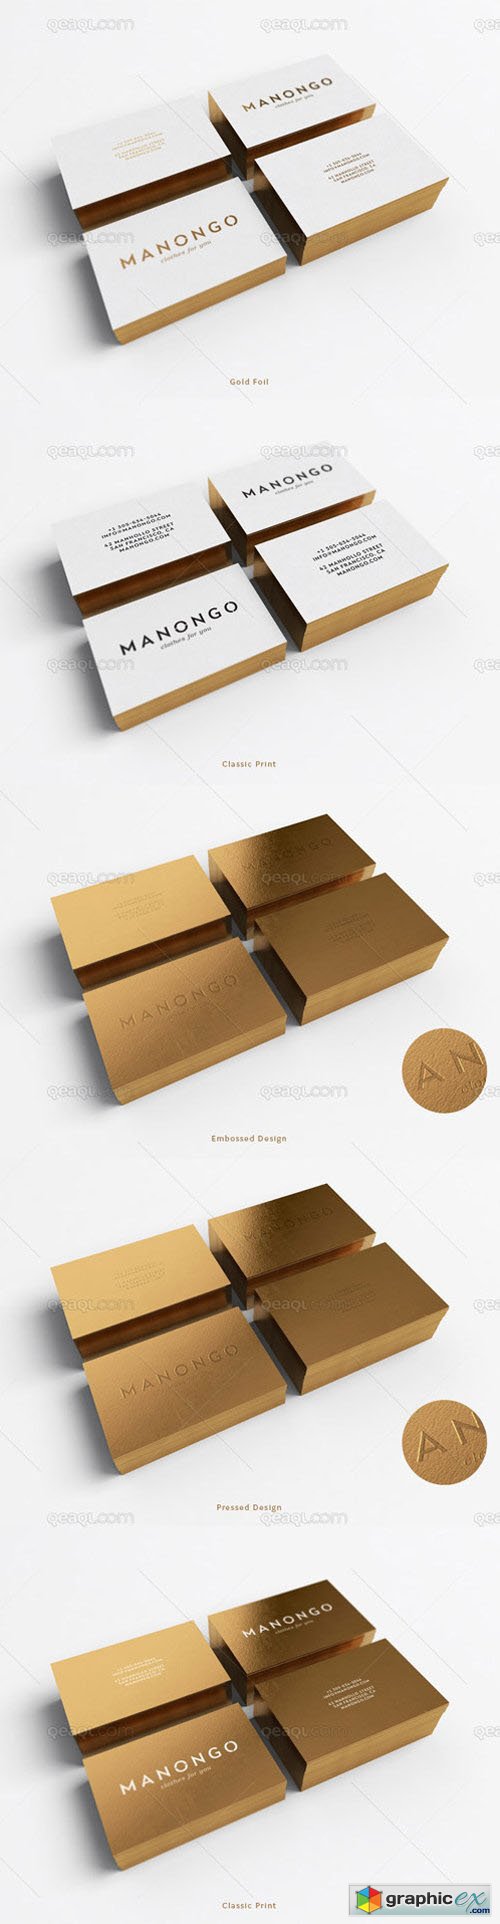 Business Card Mock-up - Brand Of Clothing